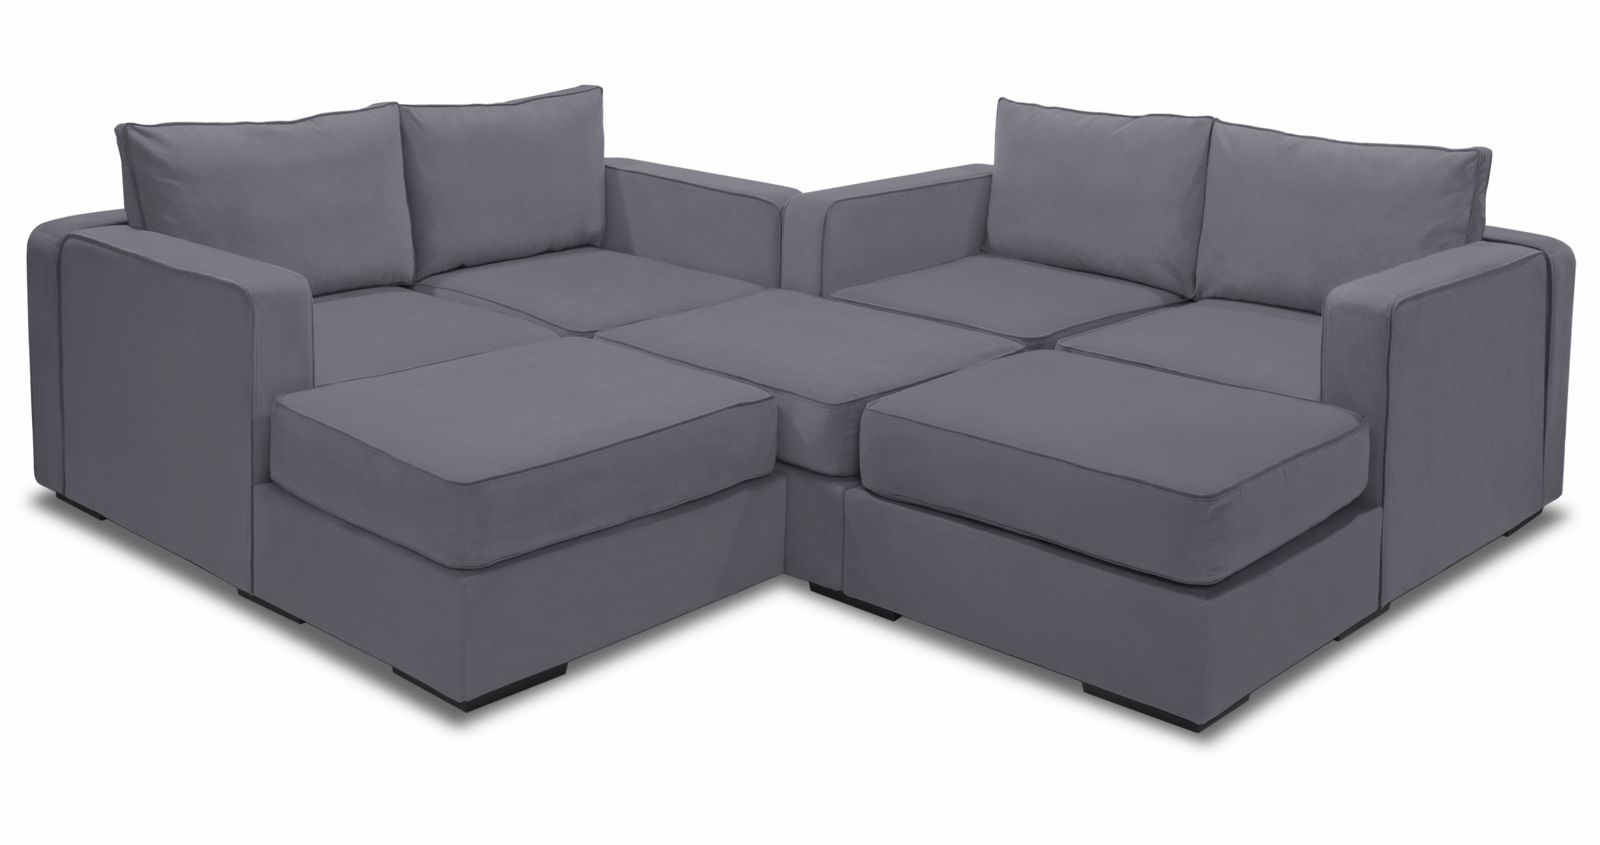 Large Modular Sectional Couch | 7 Seats + 8 Sides | Lovesac